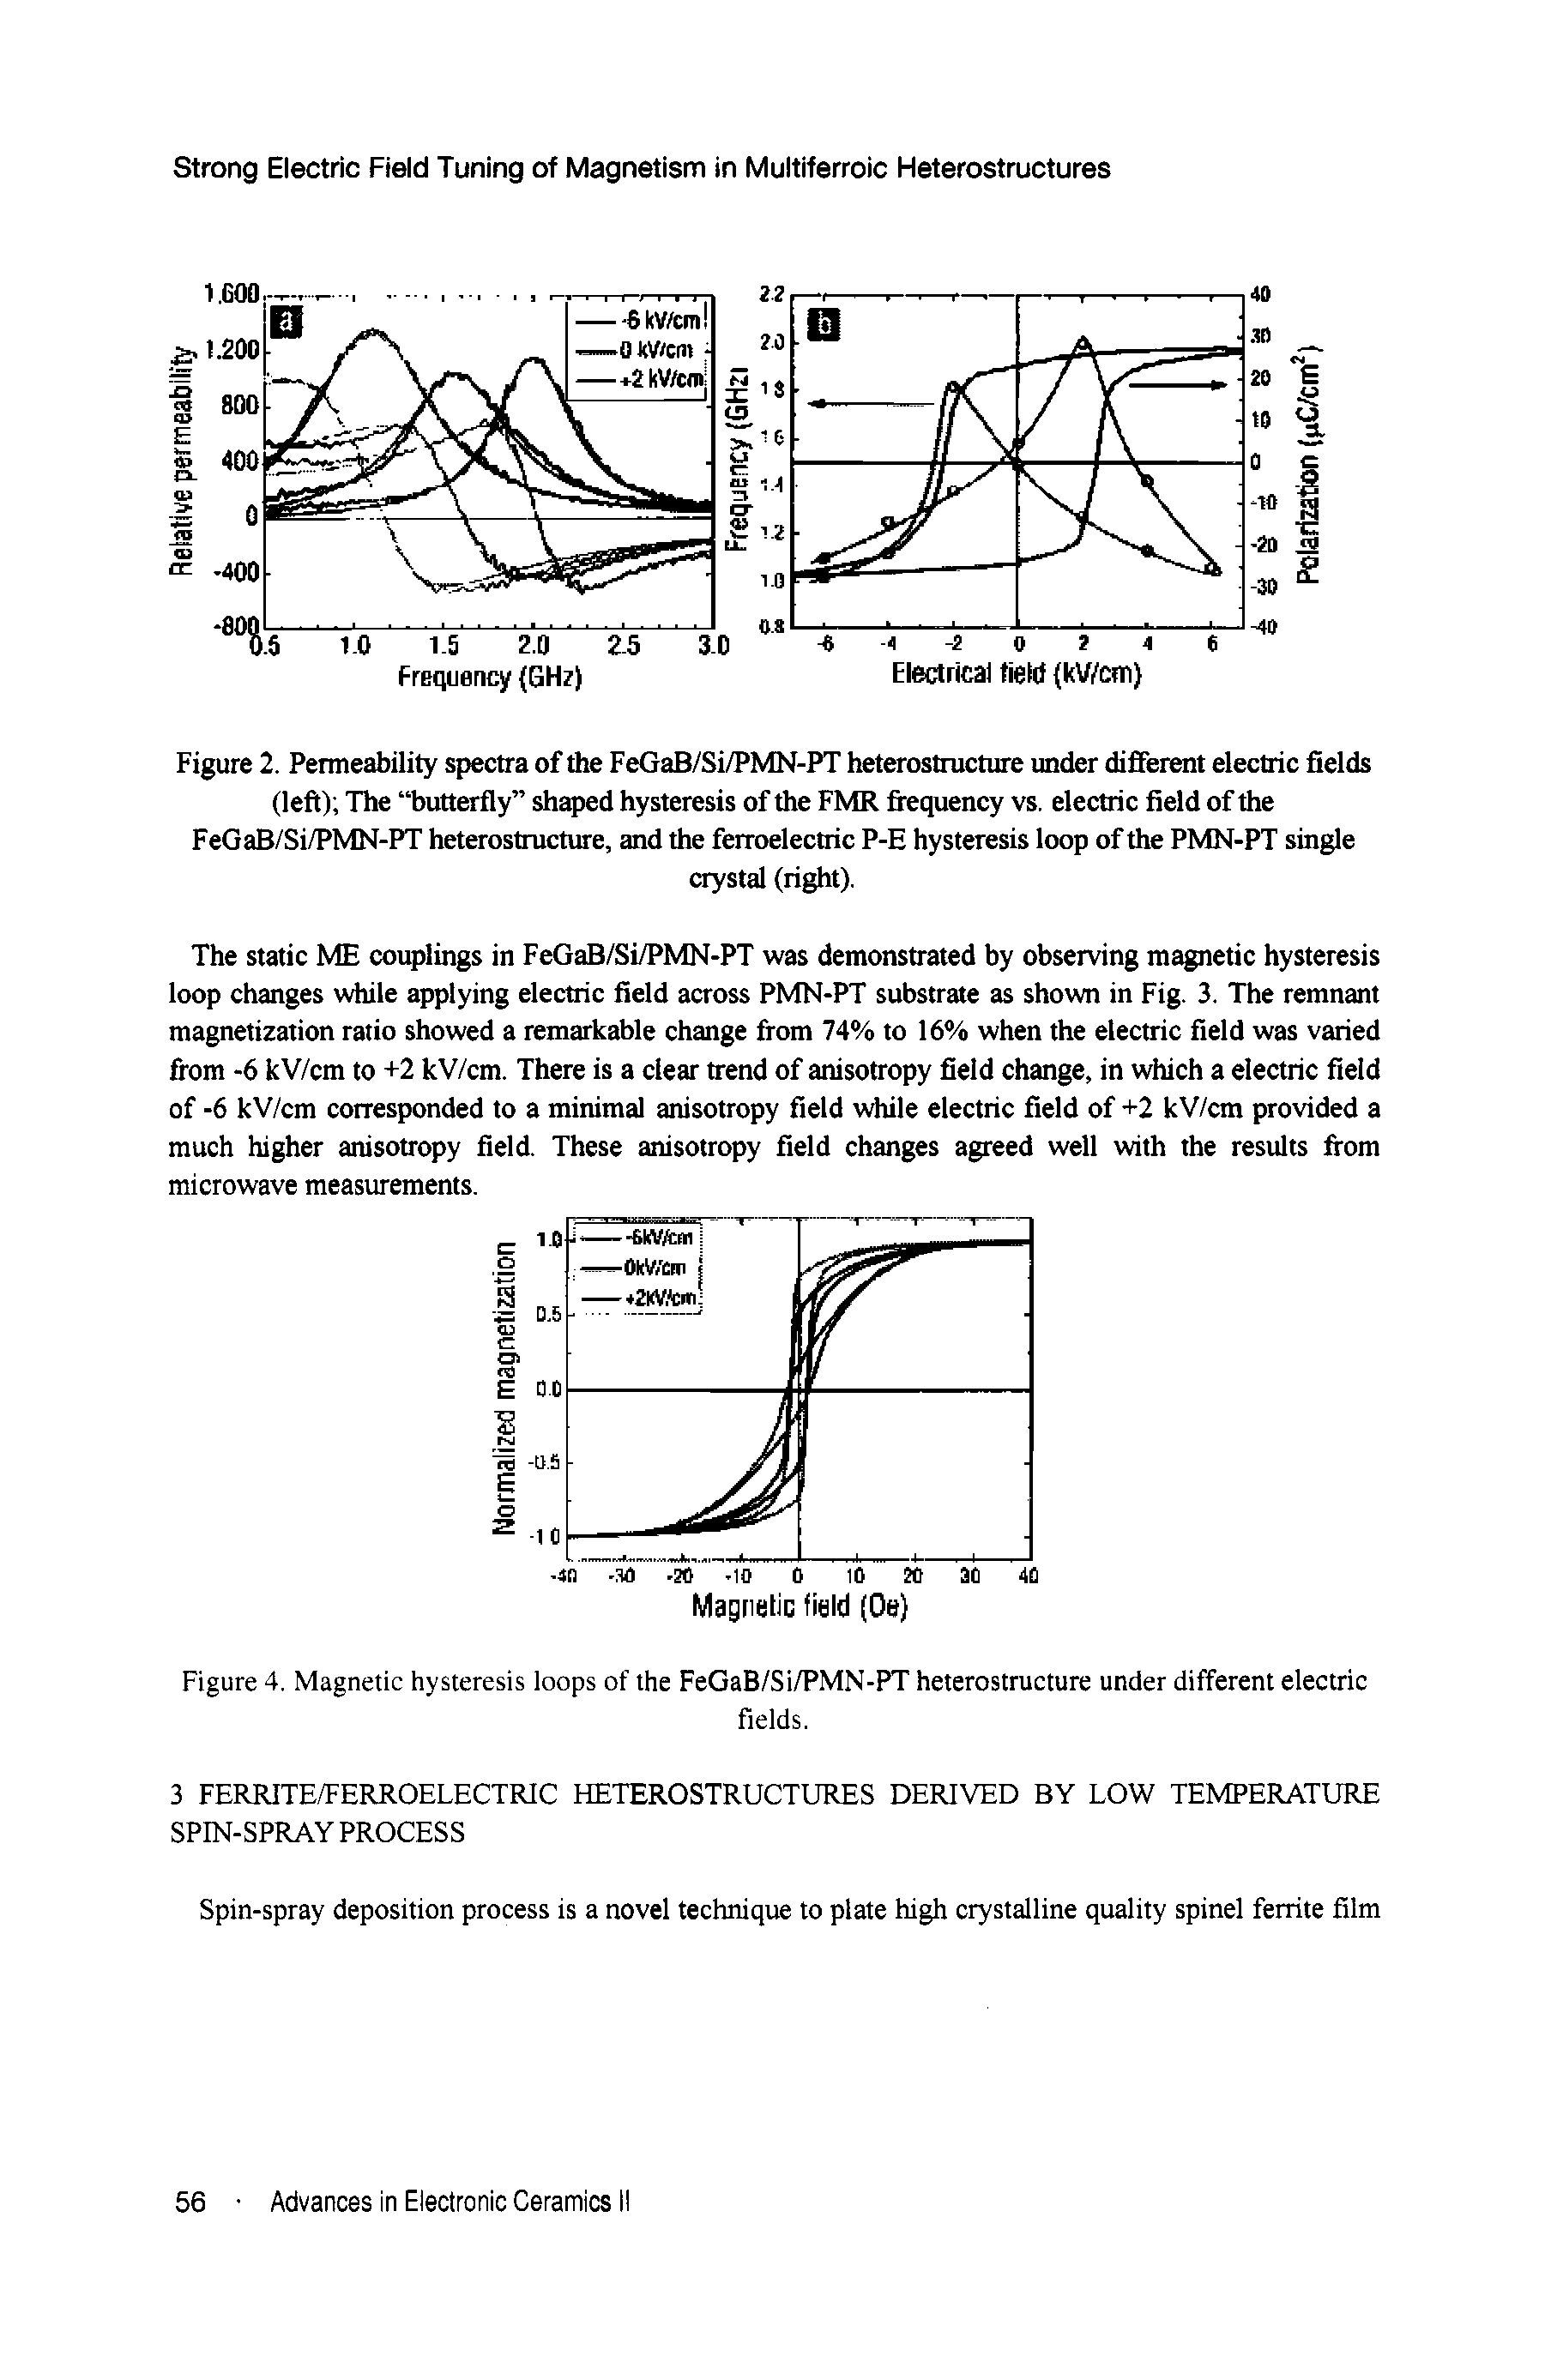 Figure 2. Permeability spectra of the FeGaB/Si/PMN-PT heterostnicture under different electric fields (left) The butterfly sh d hysteresis of the FMR fiequency vs. electric field of the FeGaB/Si/PMN-PT heterostructure, and the ferroelectric P-E hysteresis loop of the PMN-PT single...